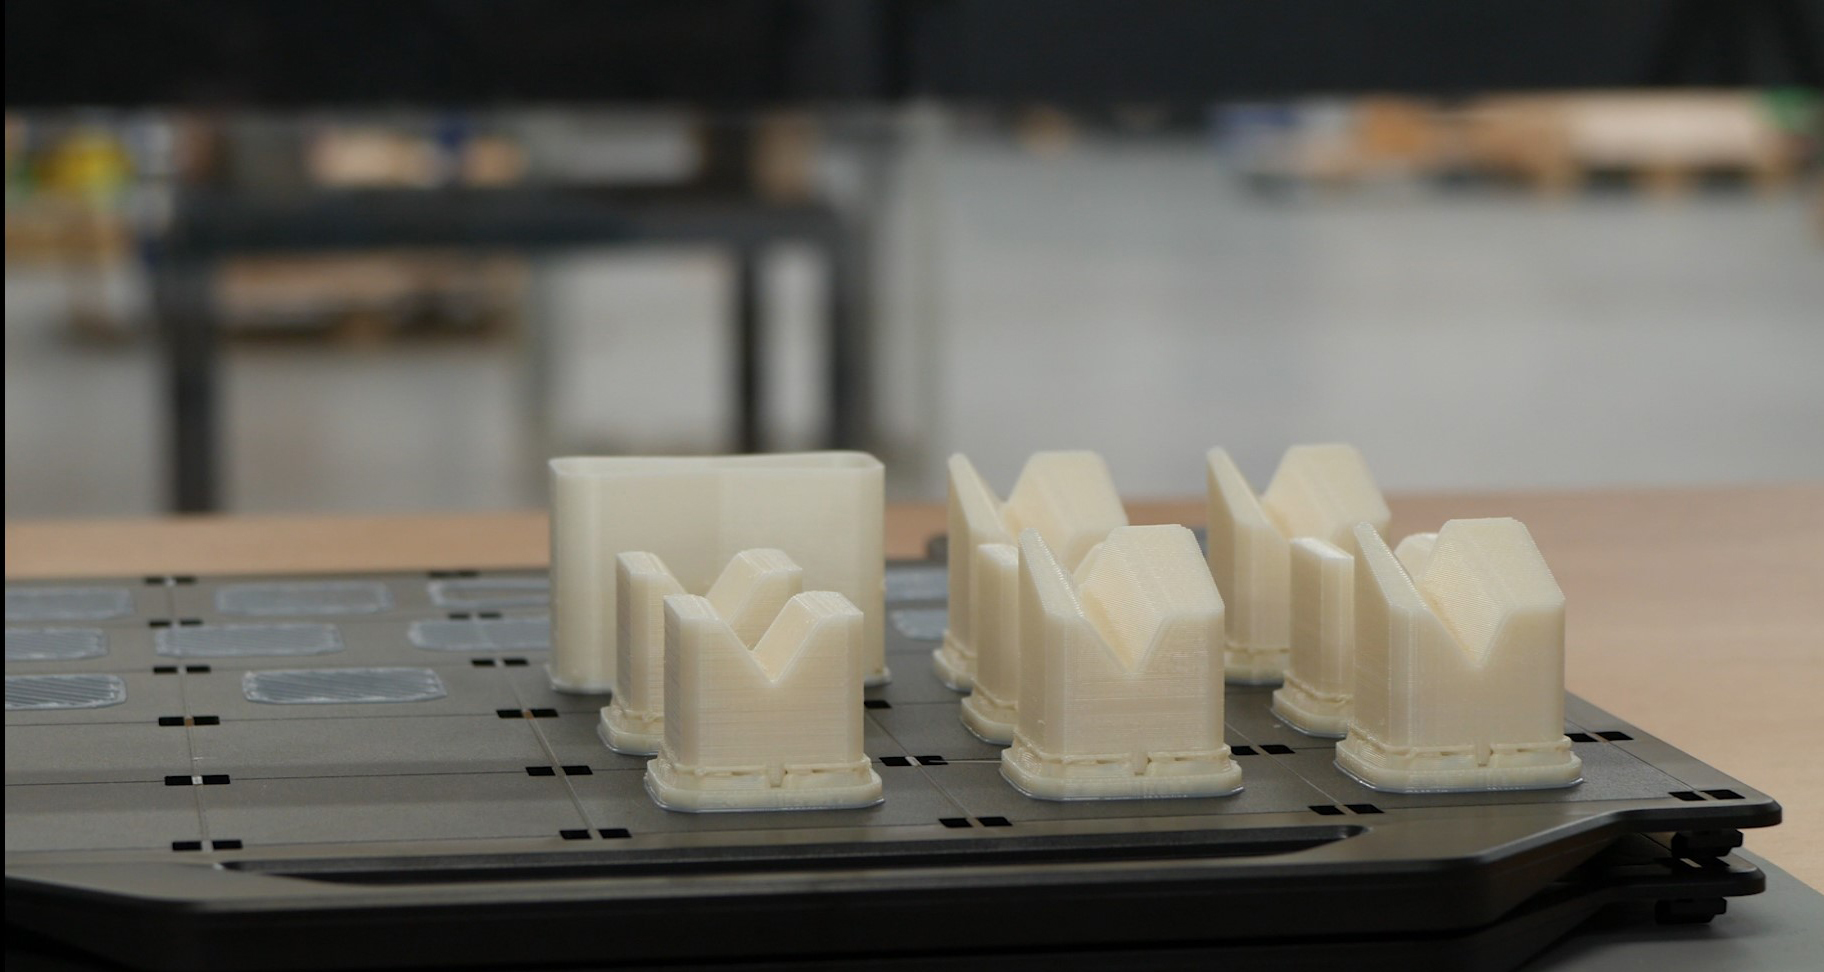 Fixtures produced on the Stratasys 3D printers. Photo via SYS Systems.